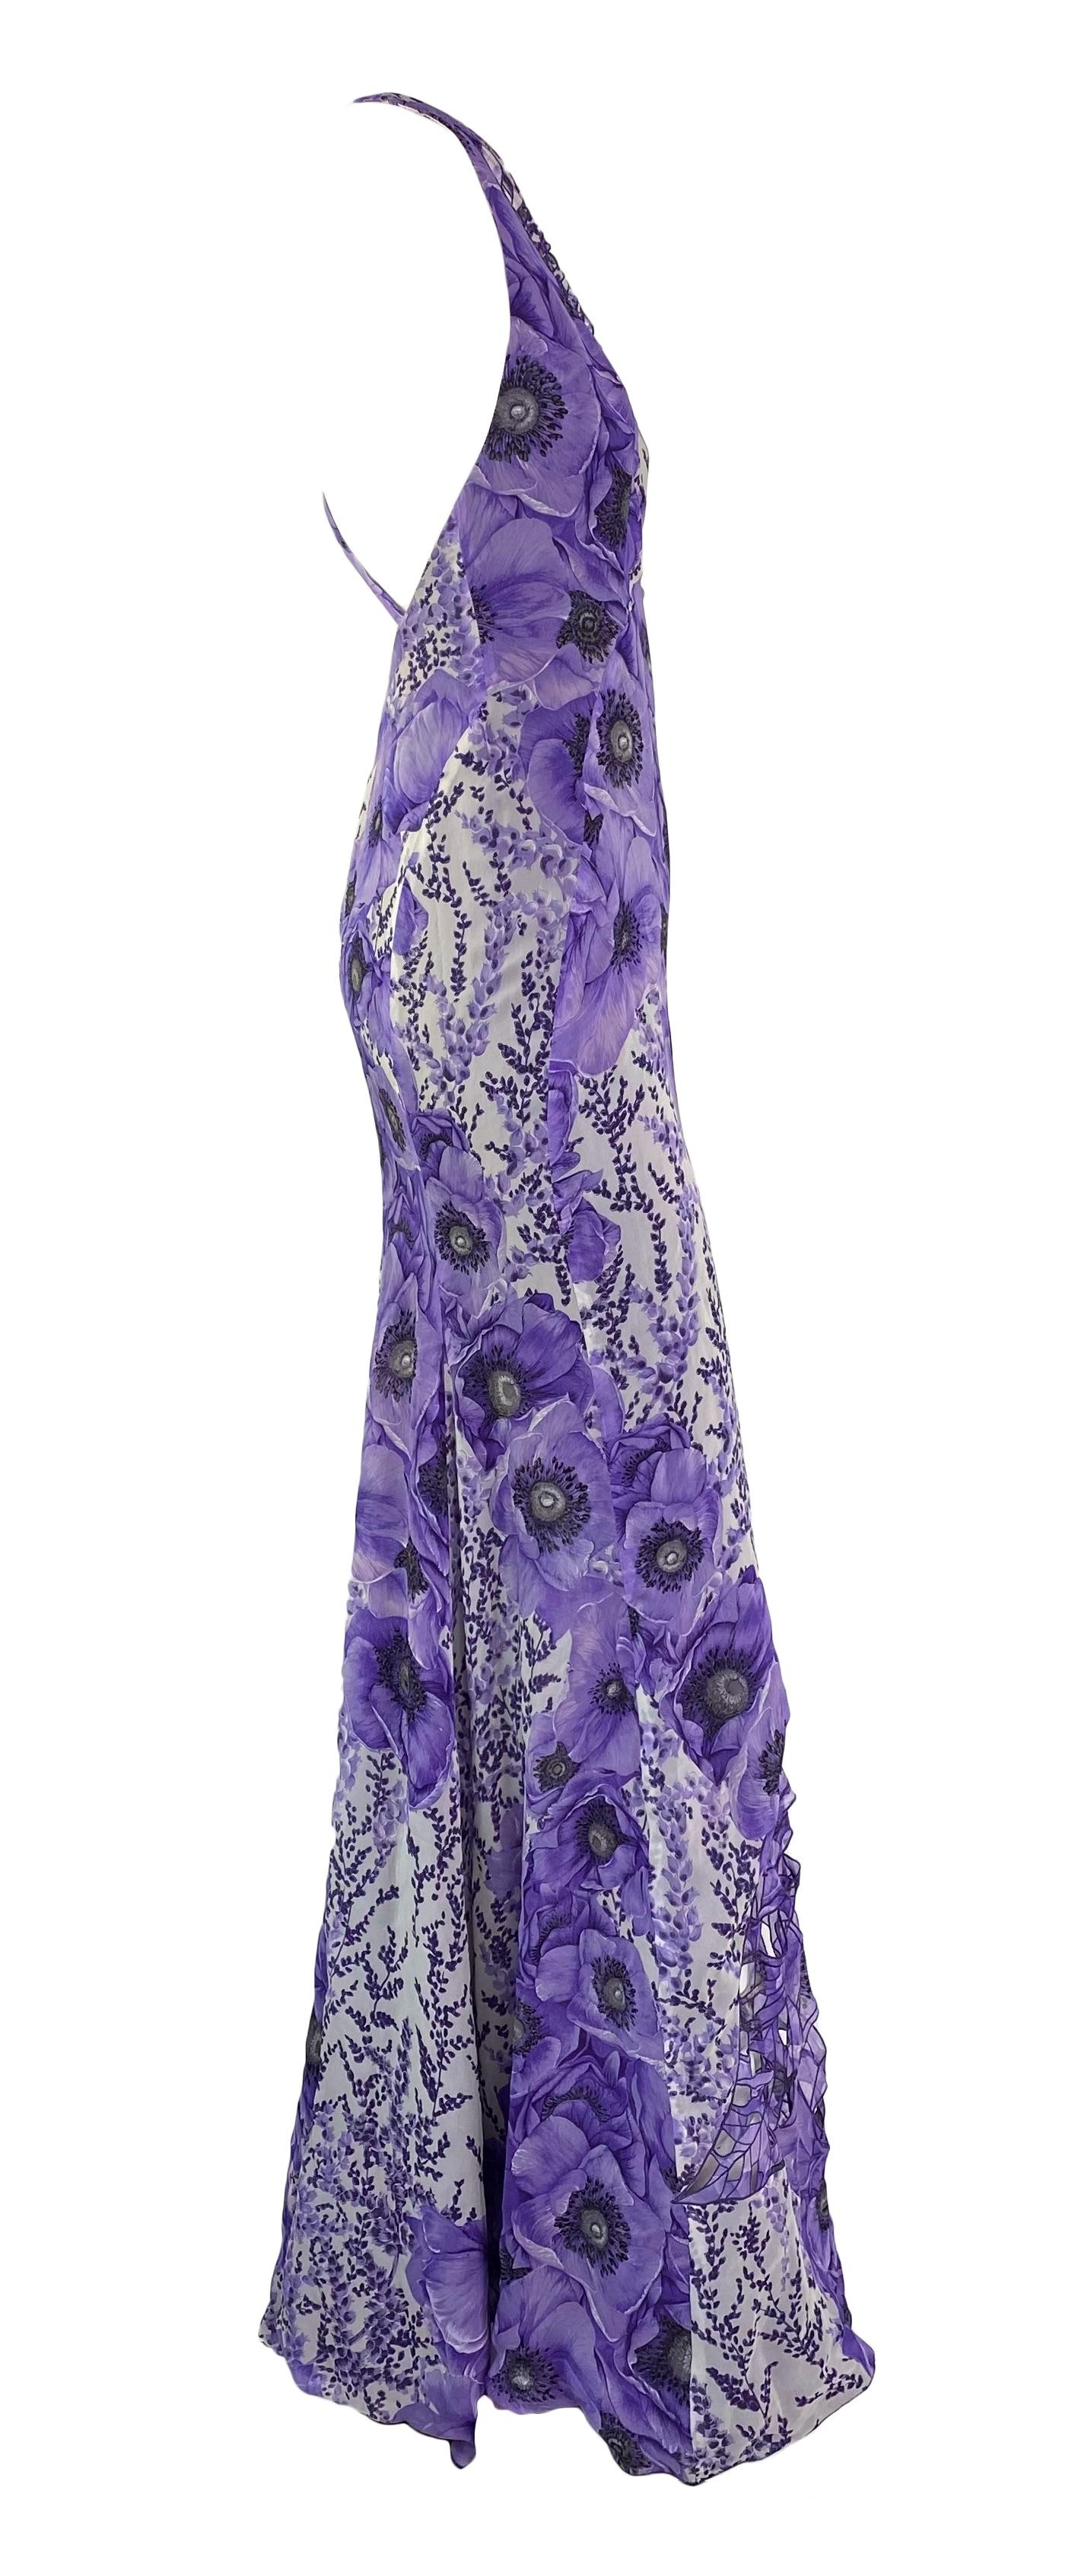 F/W 2001 Gianni Versace by Donatella Serena Williams Cut-Out Purple Poppy Gown For Sale 2